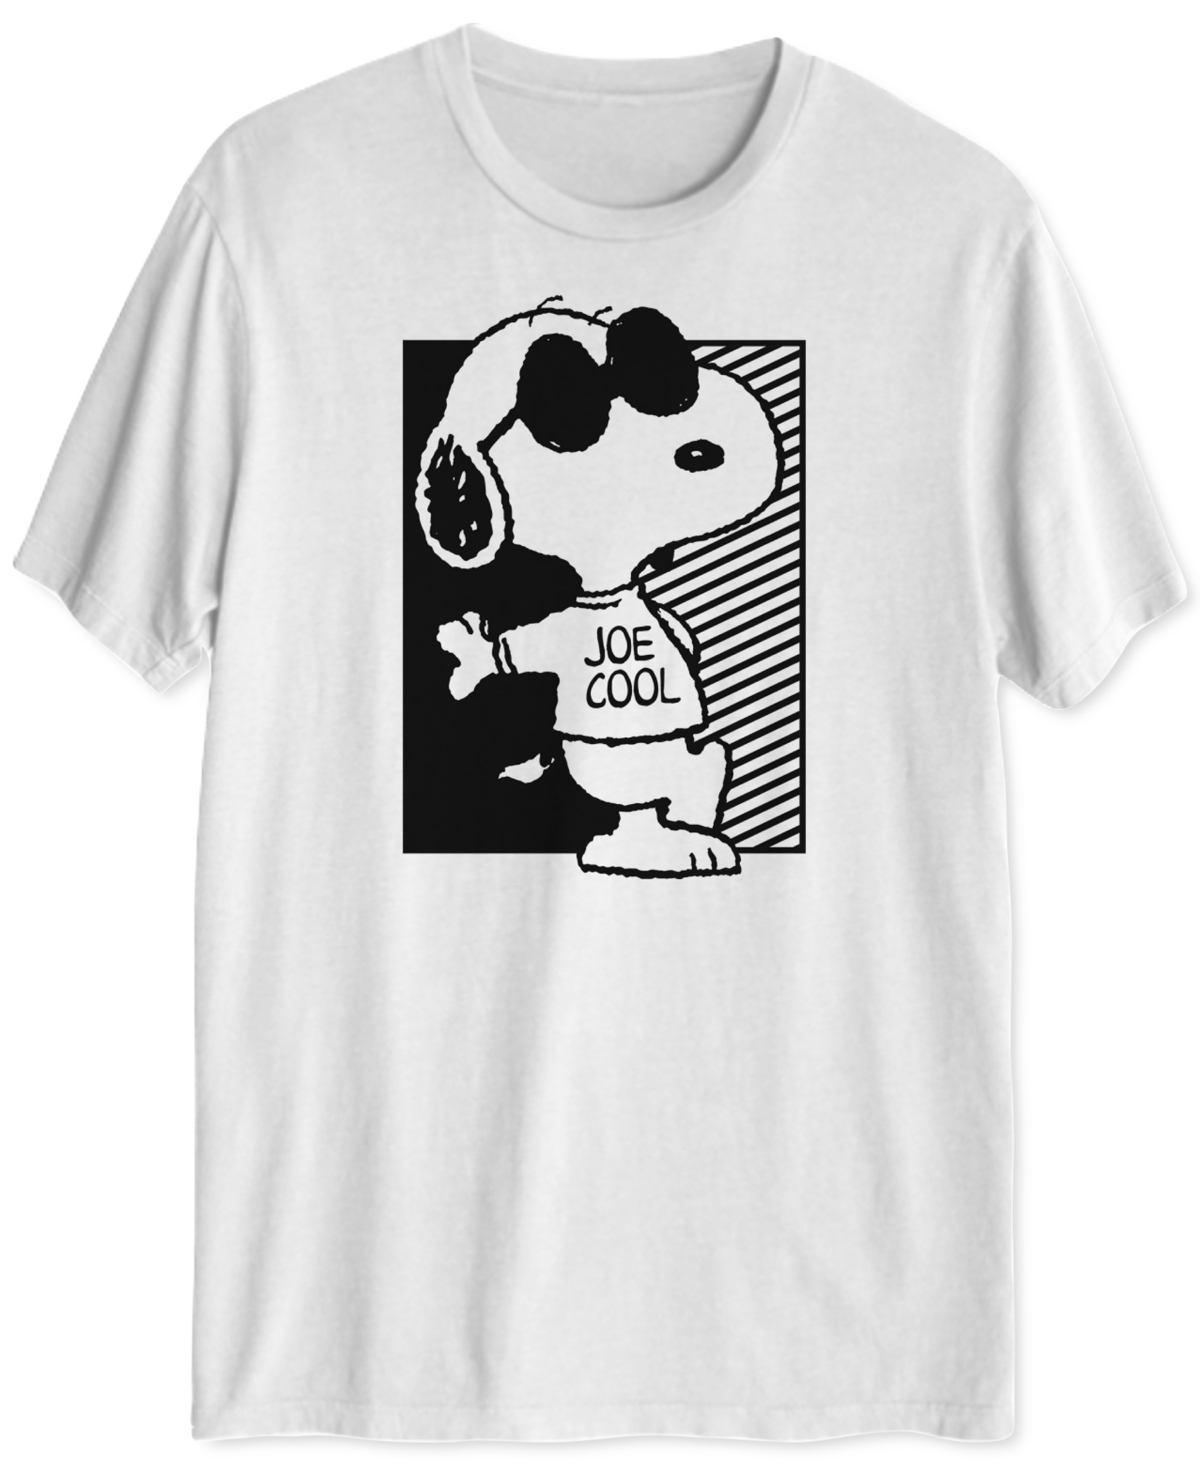 Hybrid Snoopy Too Cool Men's Graphic T-Shirt